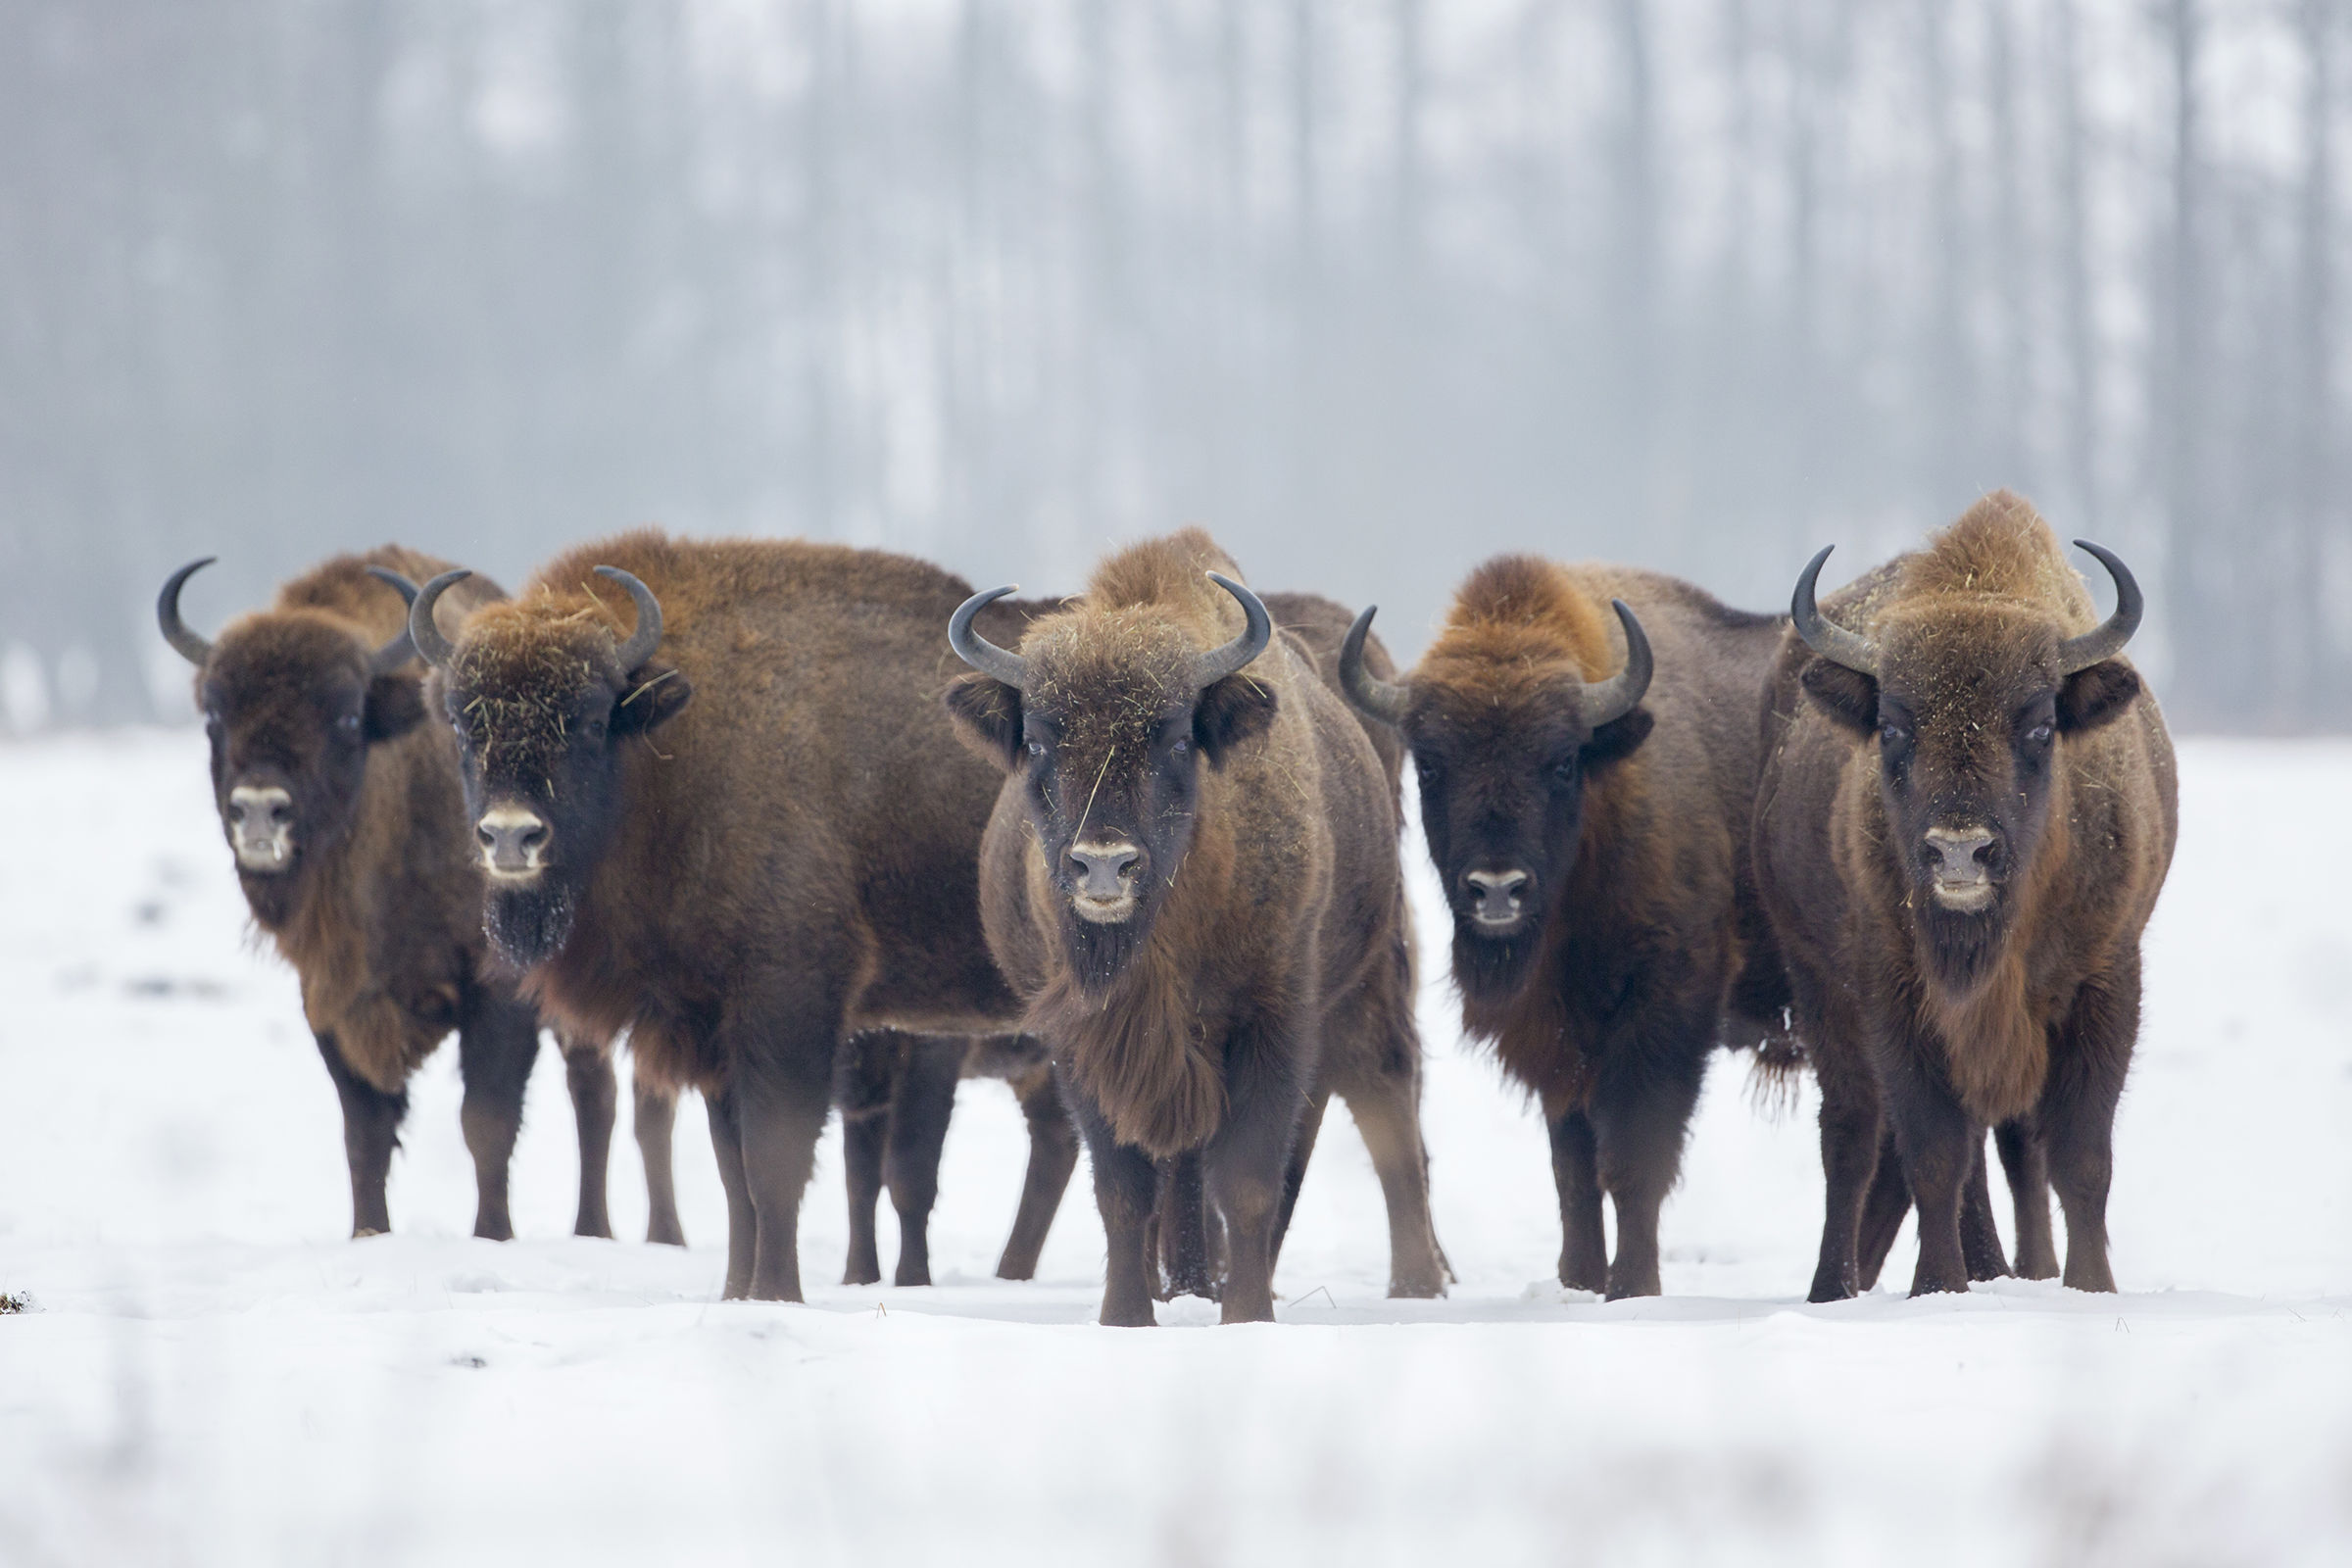 Bison in the snow (Poland)...